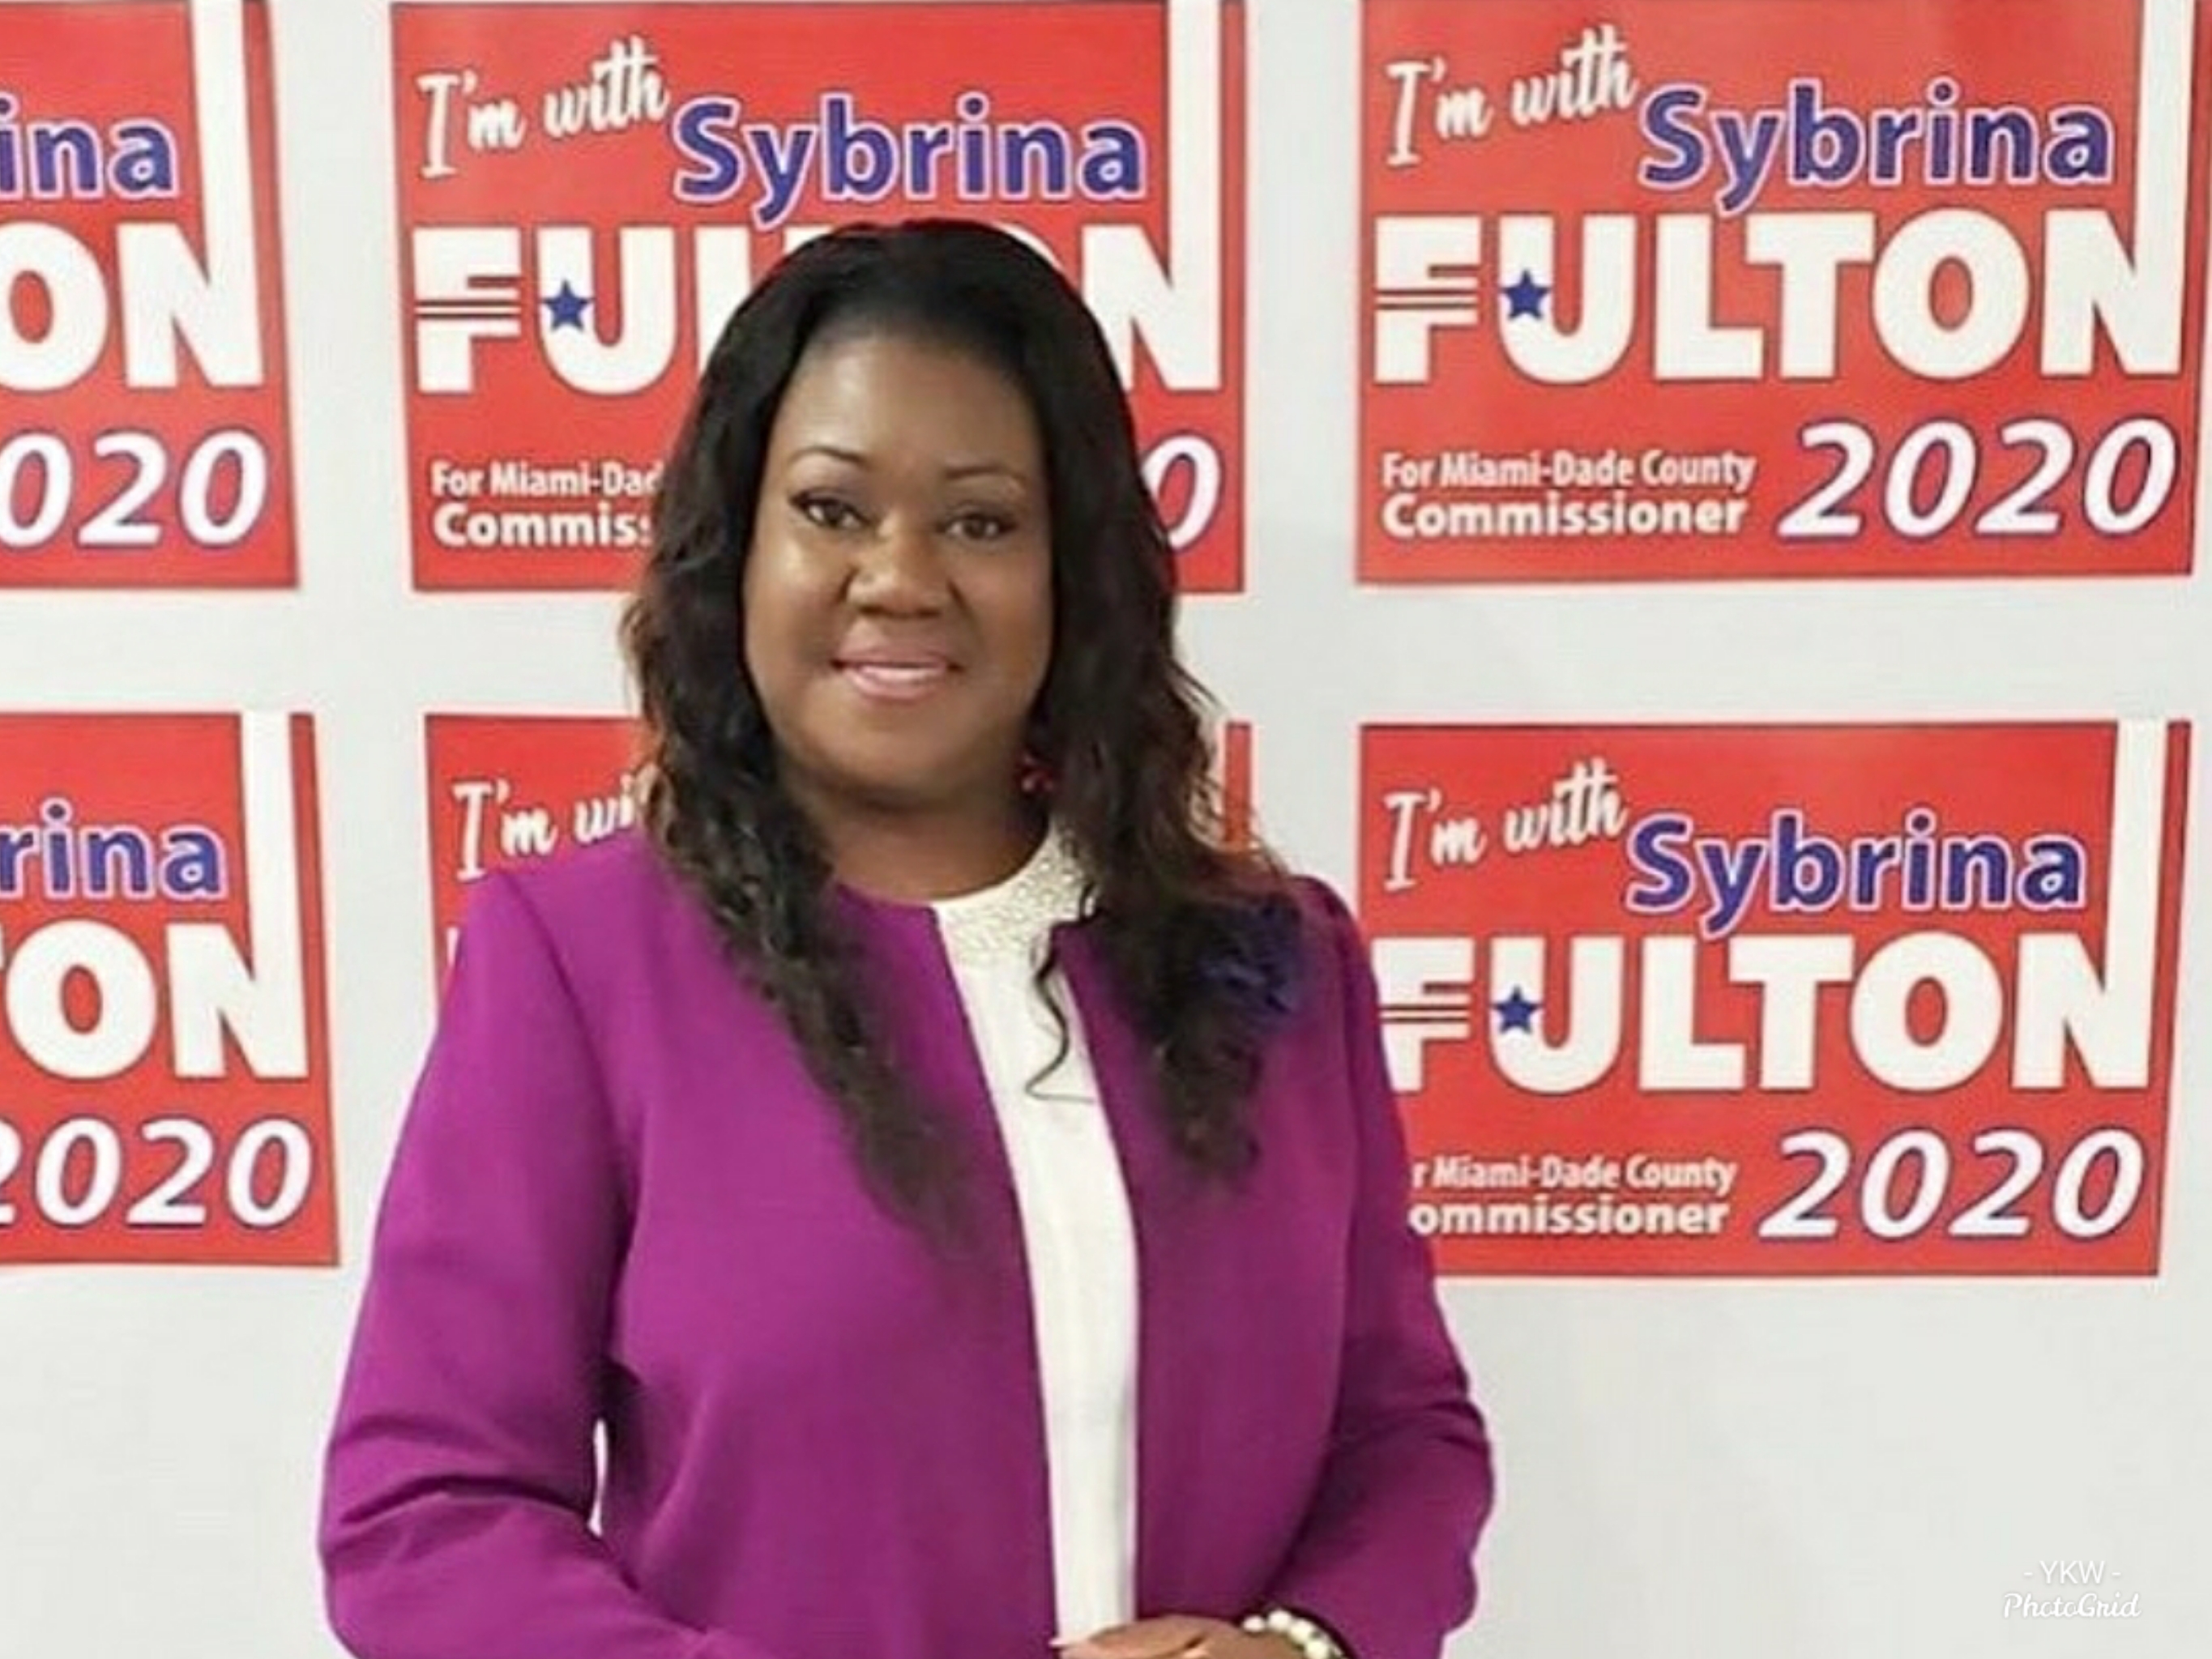 Sybrina Fulton, Mother of Trayvon Martin, Announces She’s Officially Qualified To Run For Miami-Dade County Commissioner